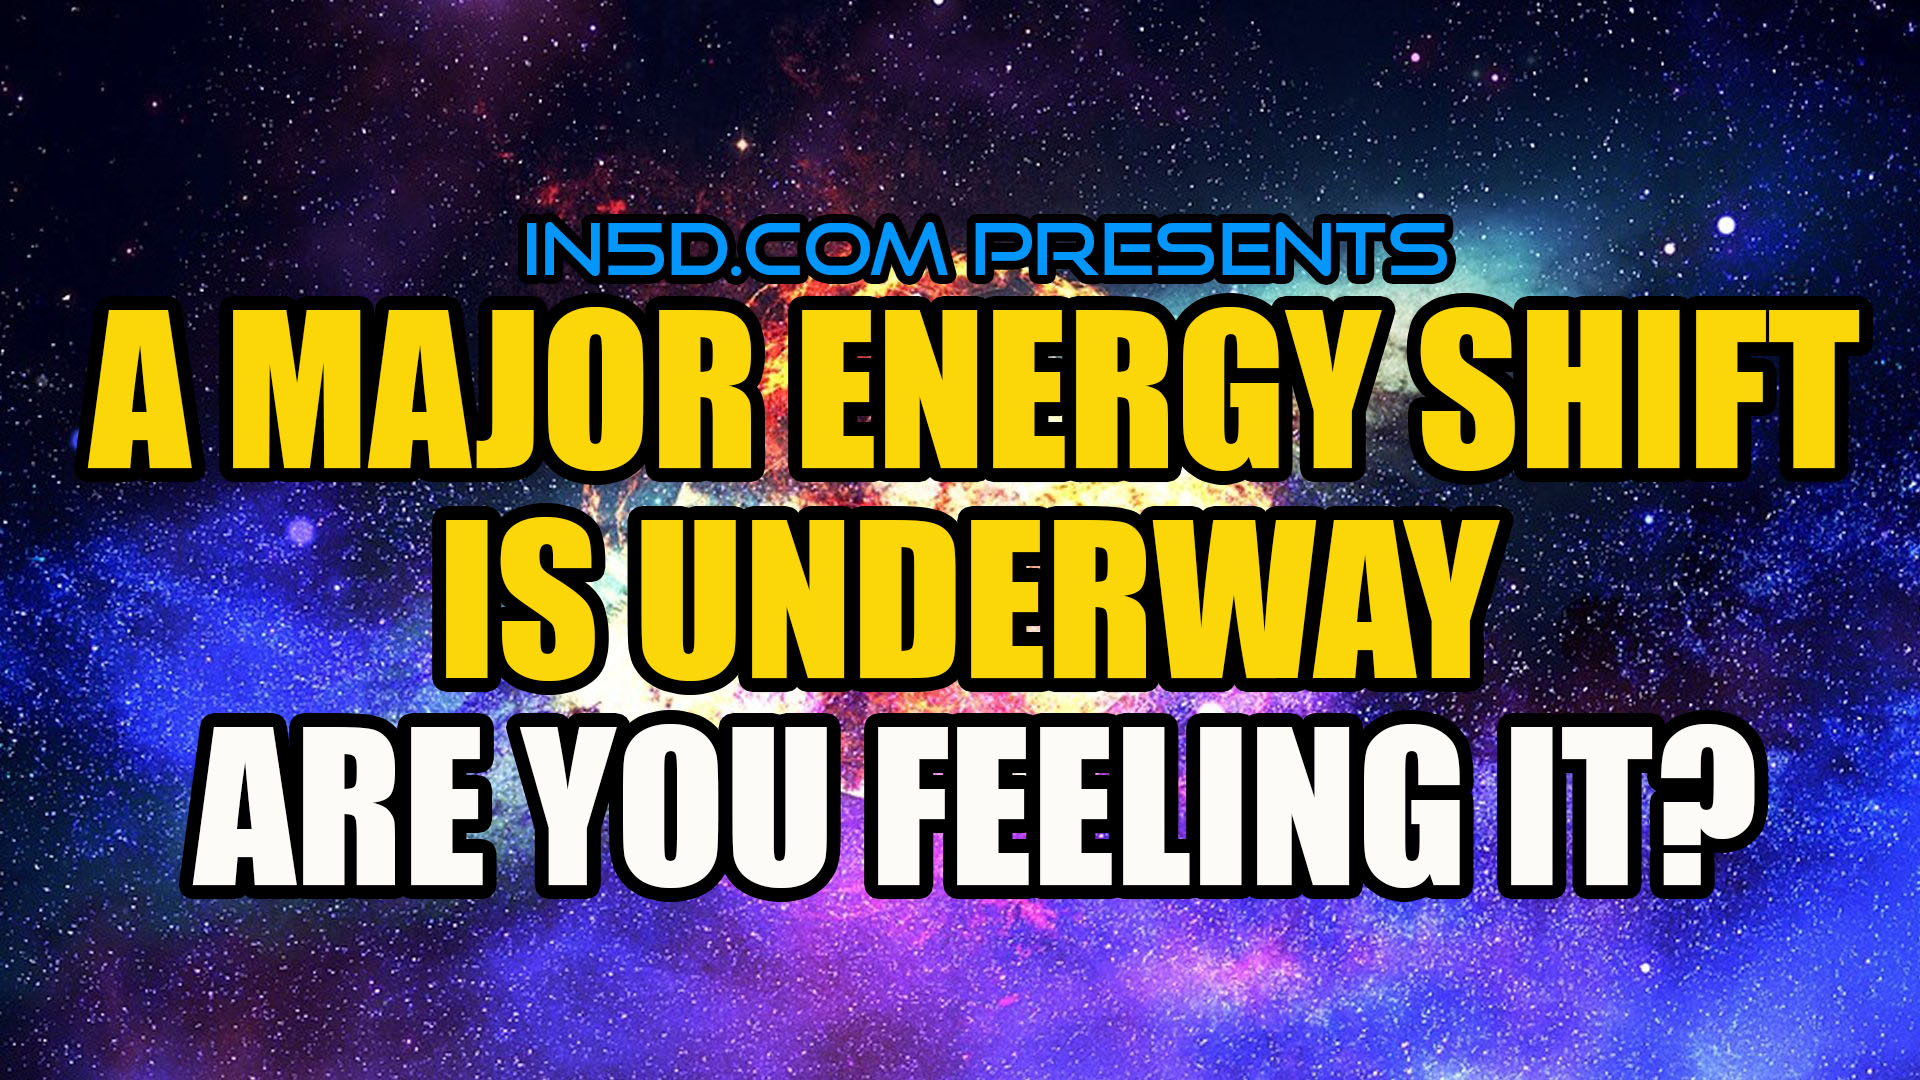  Major Energy Shift Is Underway – Are You Feeling It?